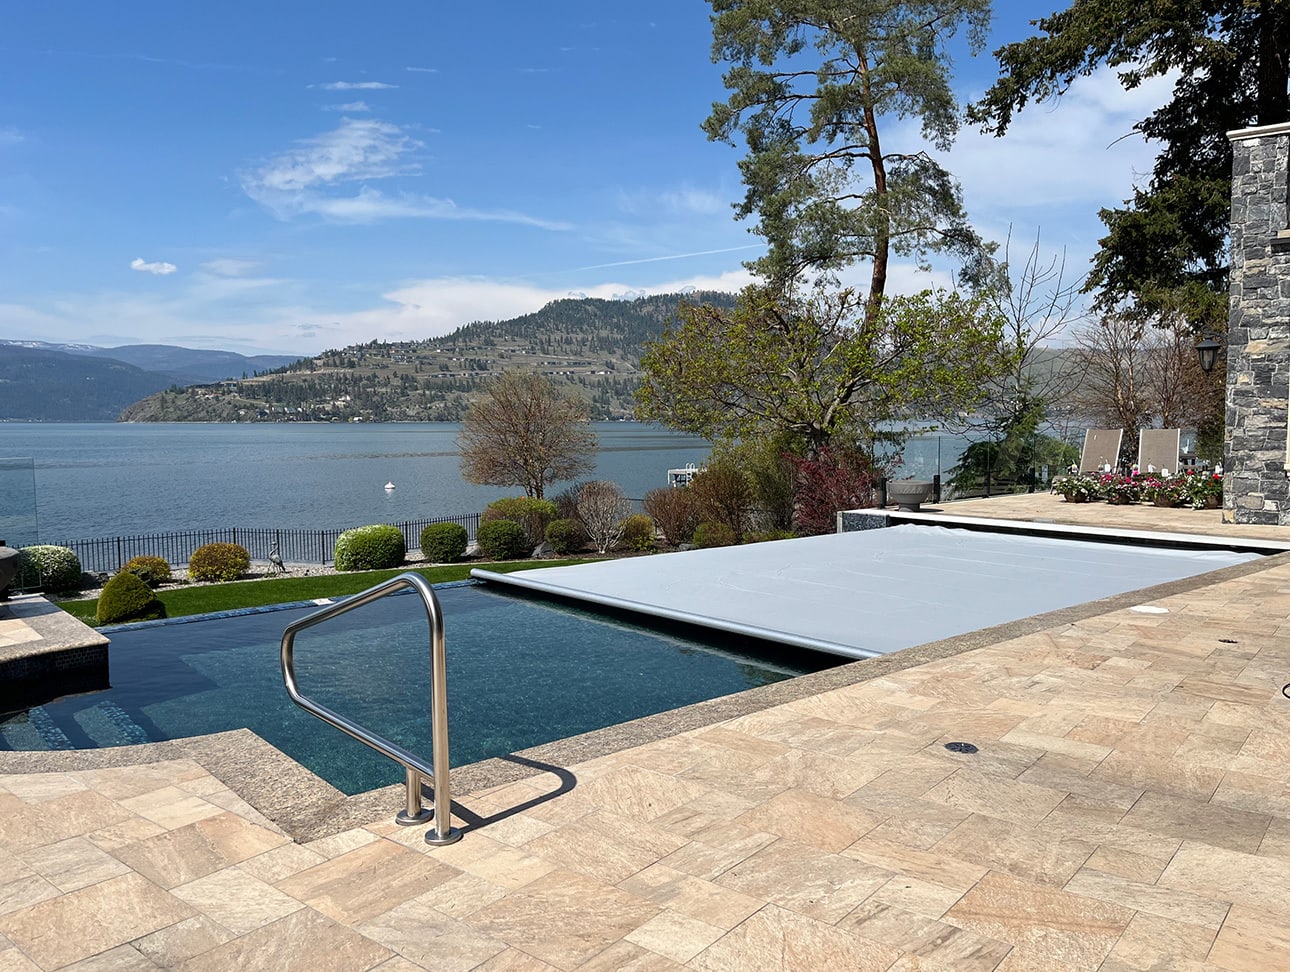 Beauty and peace of mind converge with infintiy edge pool covers. Pool Patrol’s techs are experts in maintaining the aesthetics and safety of your investment. 